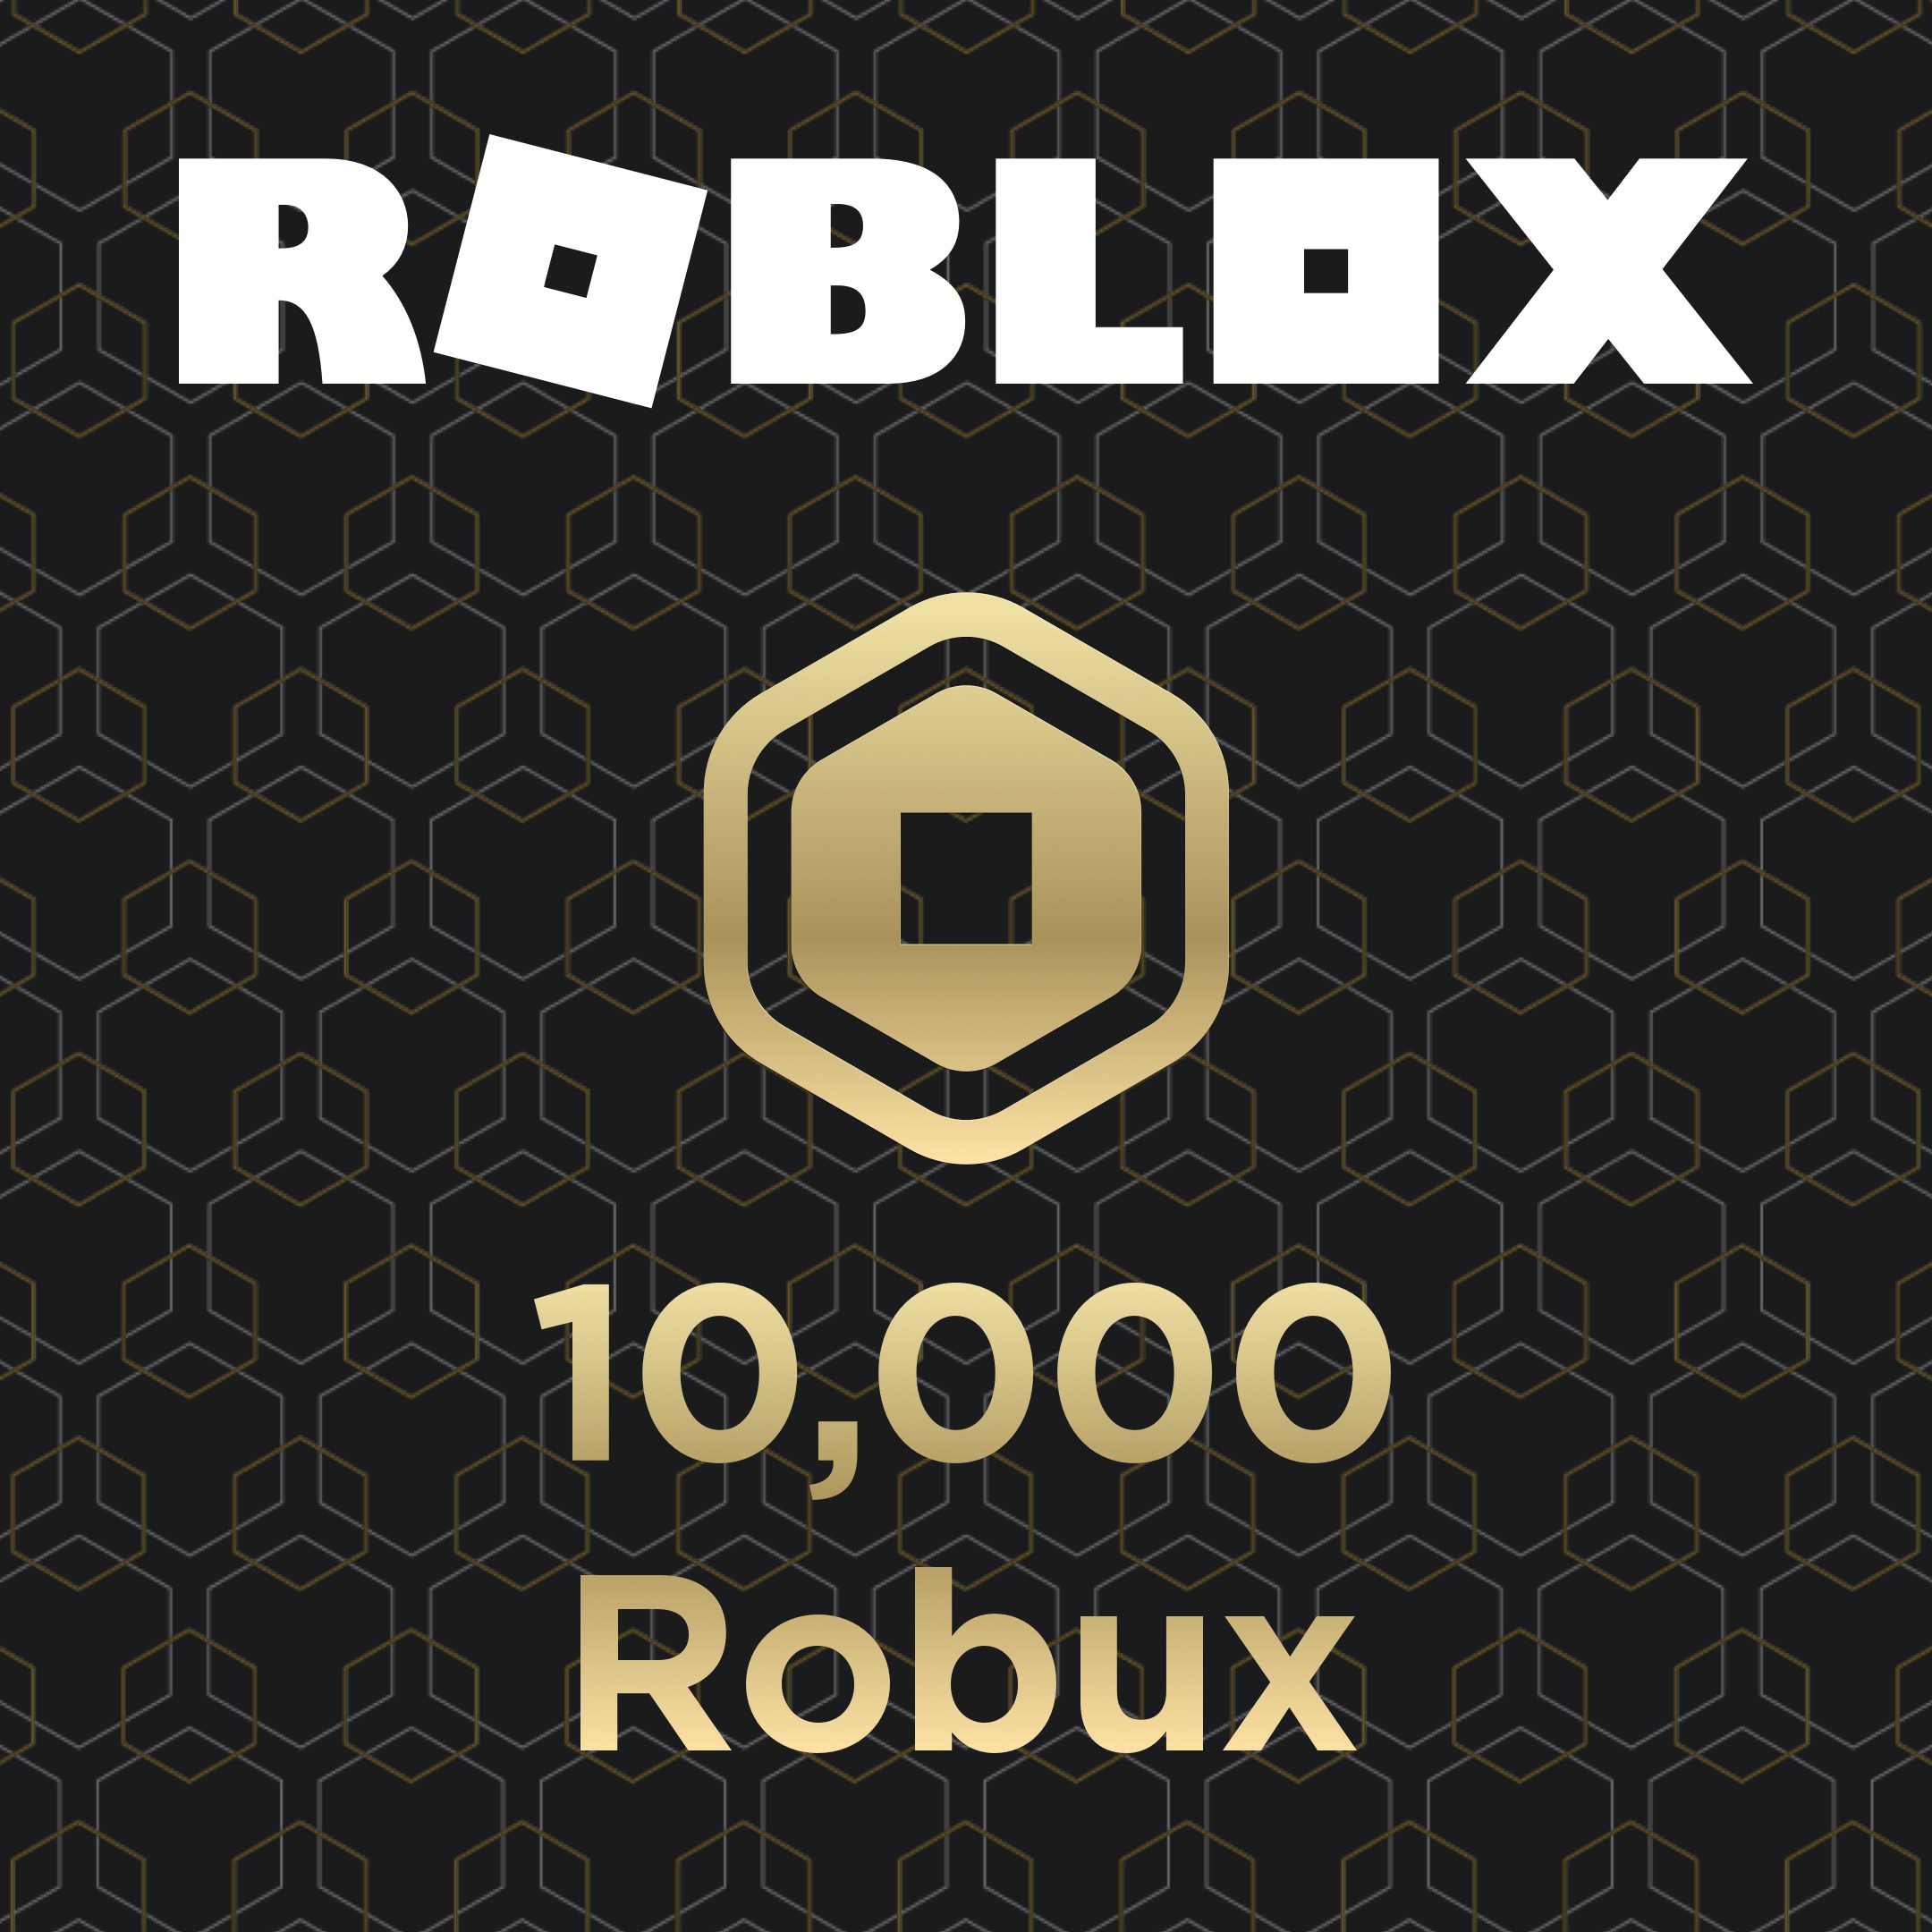 Who Developed Roblox Was It Roblox